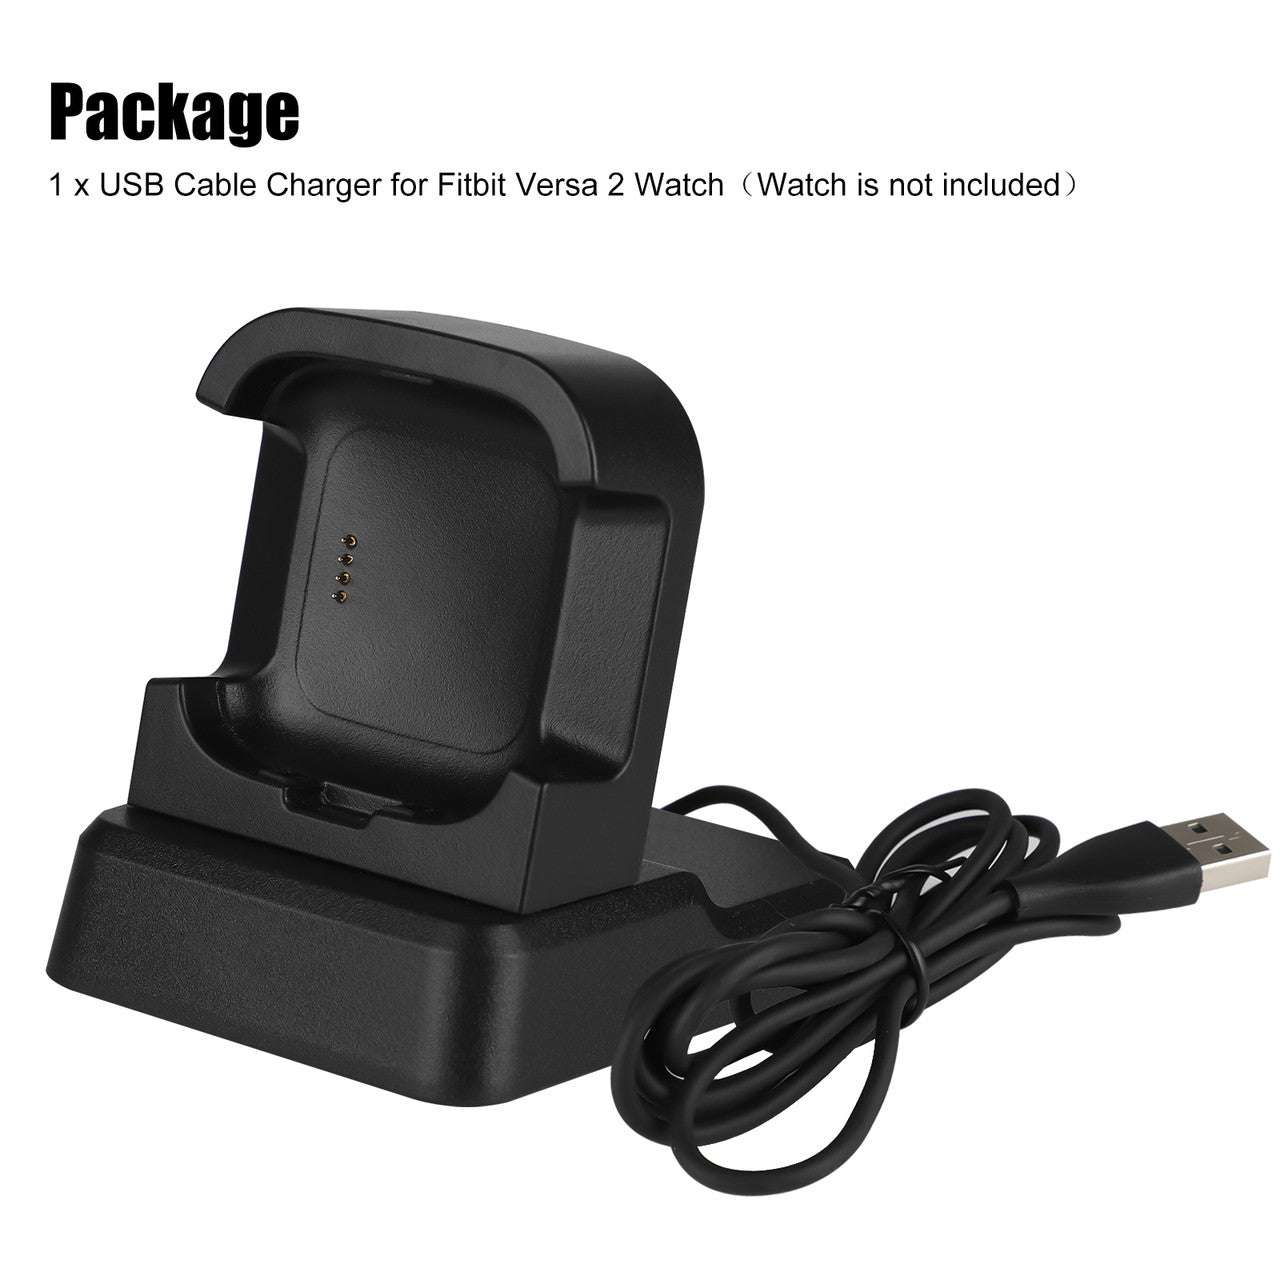 USB Replacement Charging Dock Cable Stand Station Base Accessories with 3.9ft Cable Compatible with Fitbit Versa 2 2019, Black